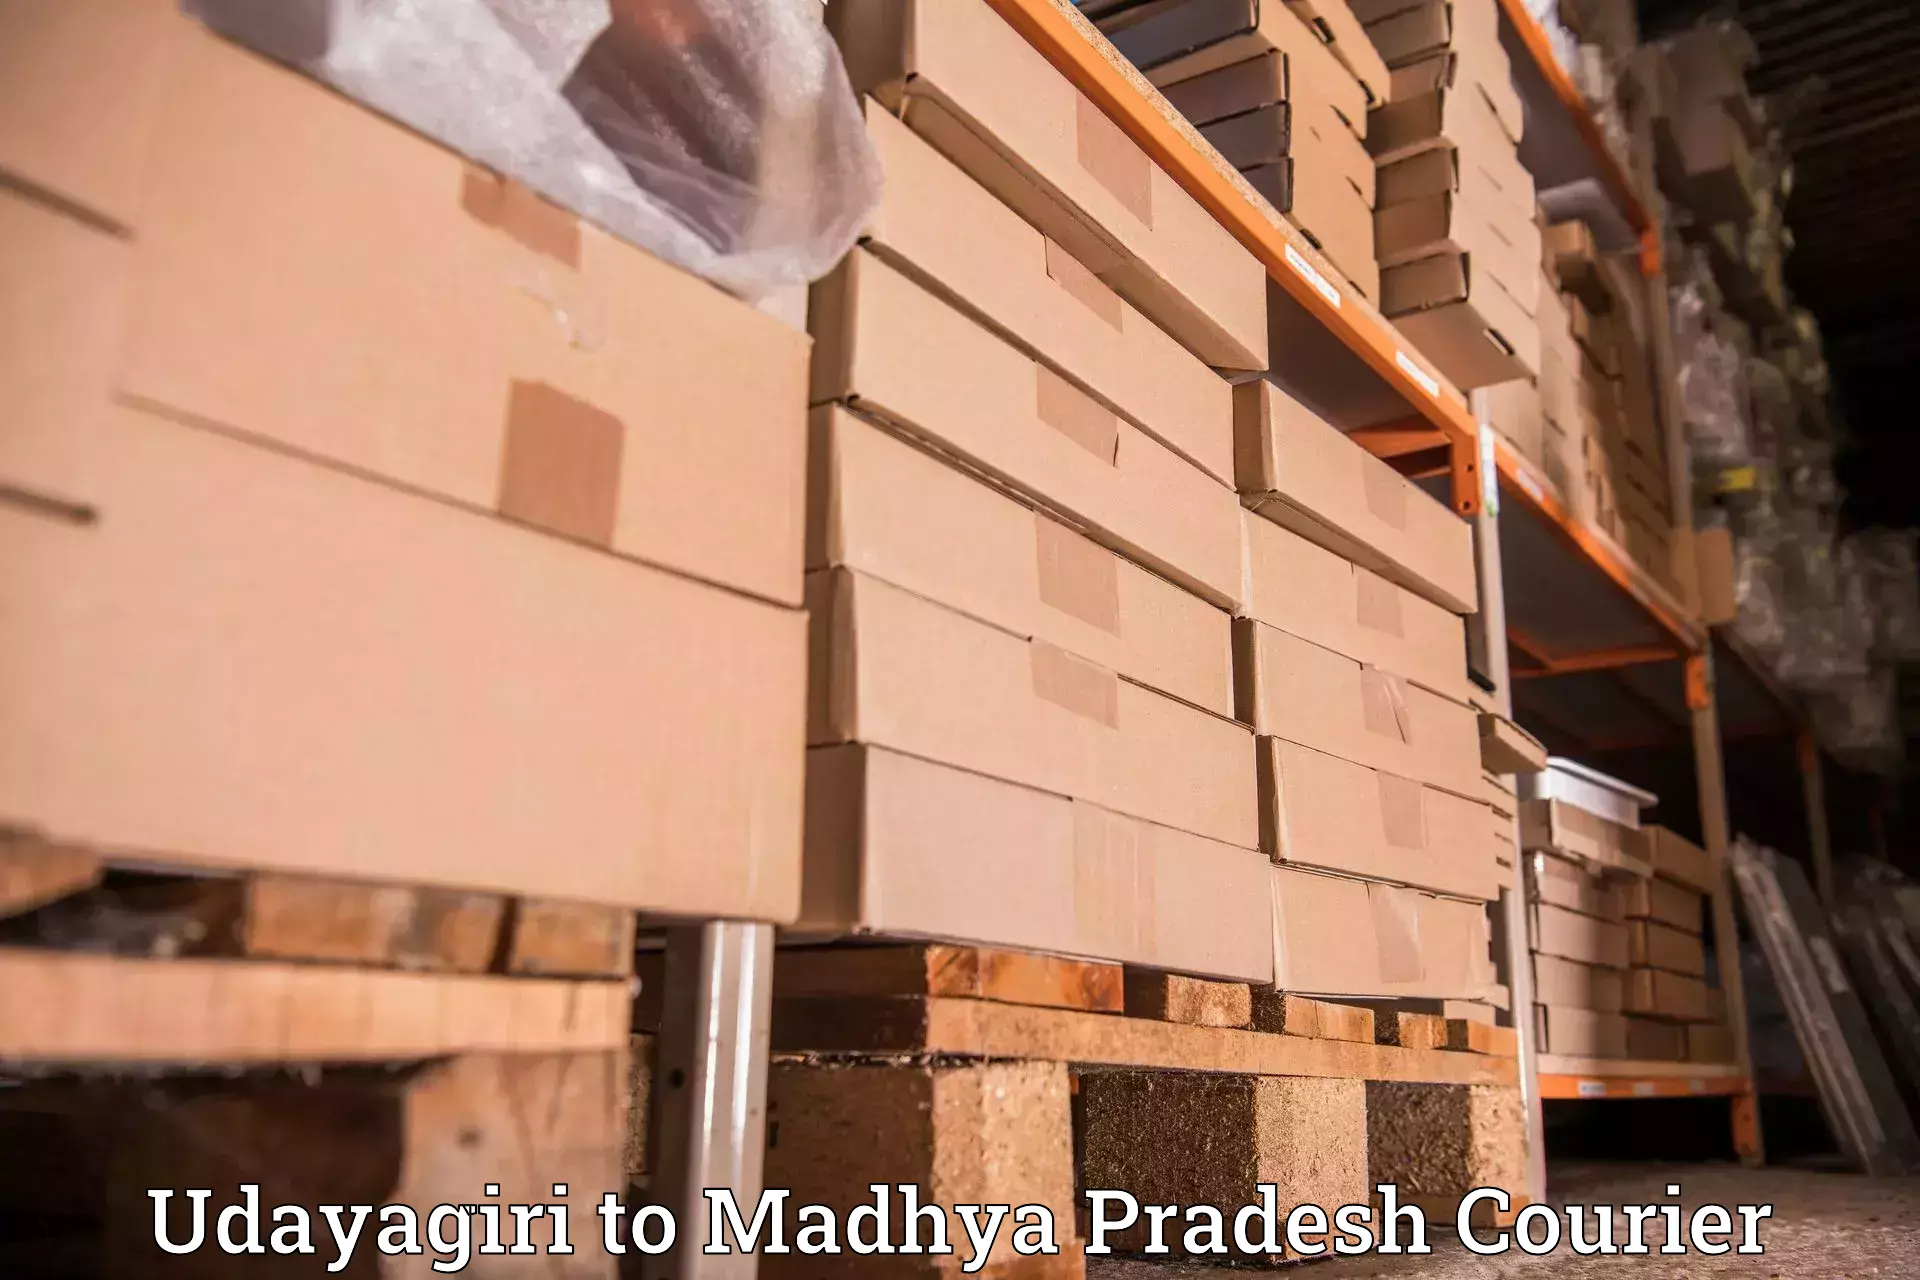 Secure freight services Udayagiri to BHEL Bhopal